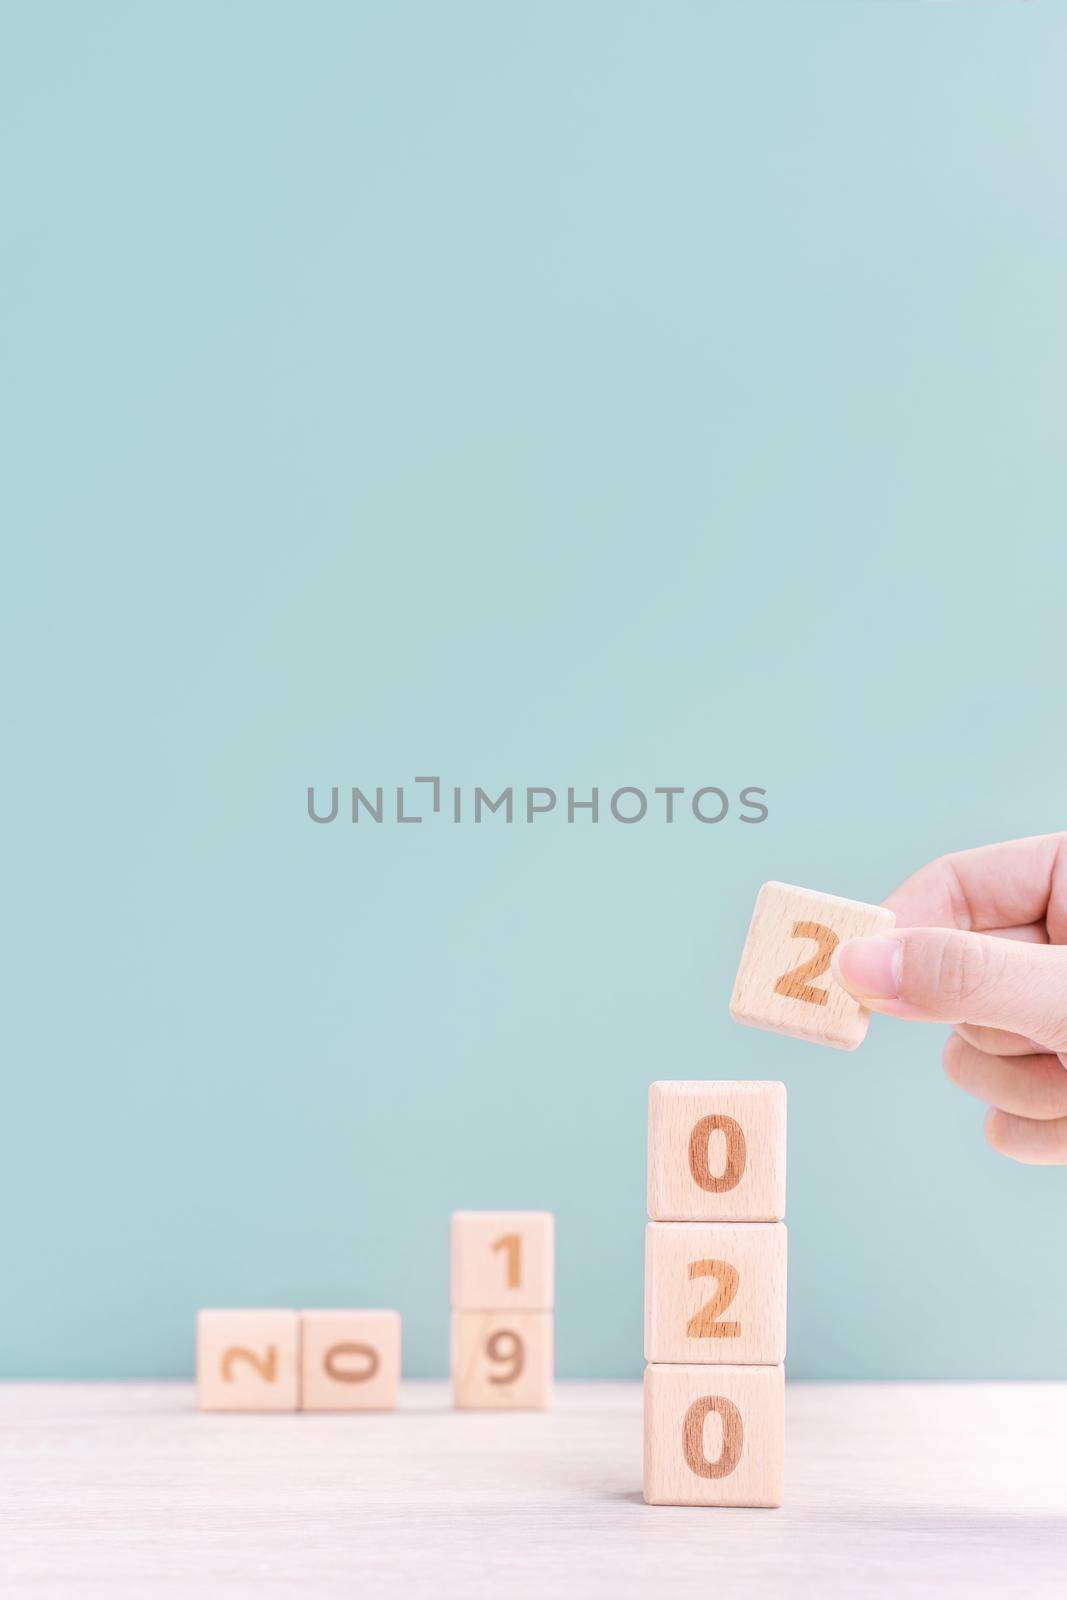 Abstract 2020 & 2019 New year countdown design concept - woman holding wood blocks cubes on wooden table and green background, close up, copy space.